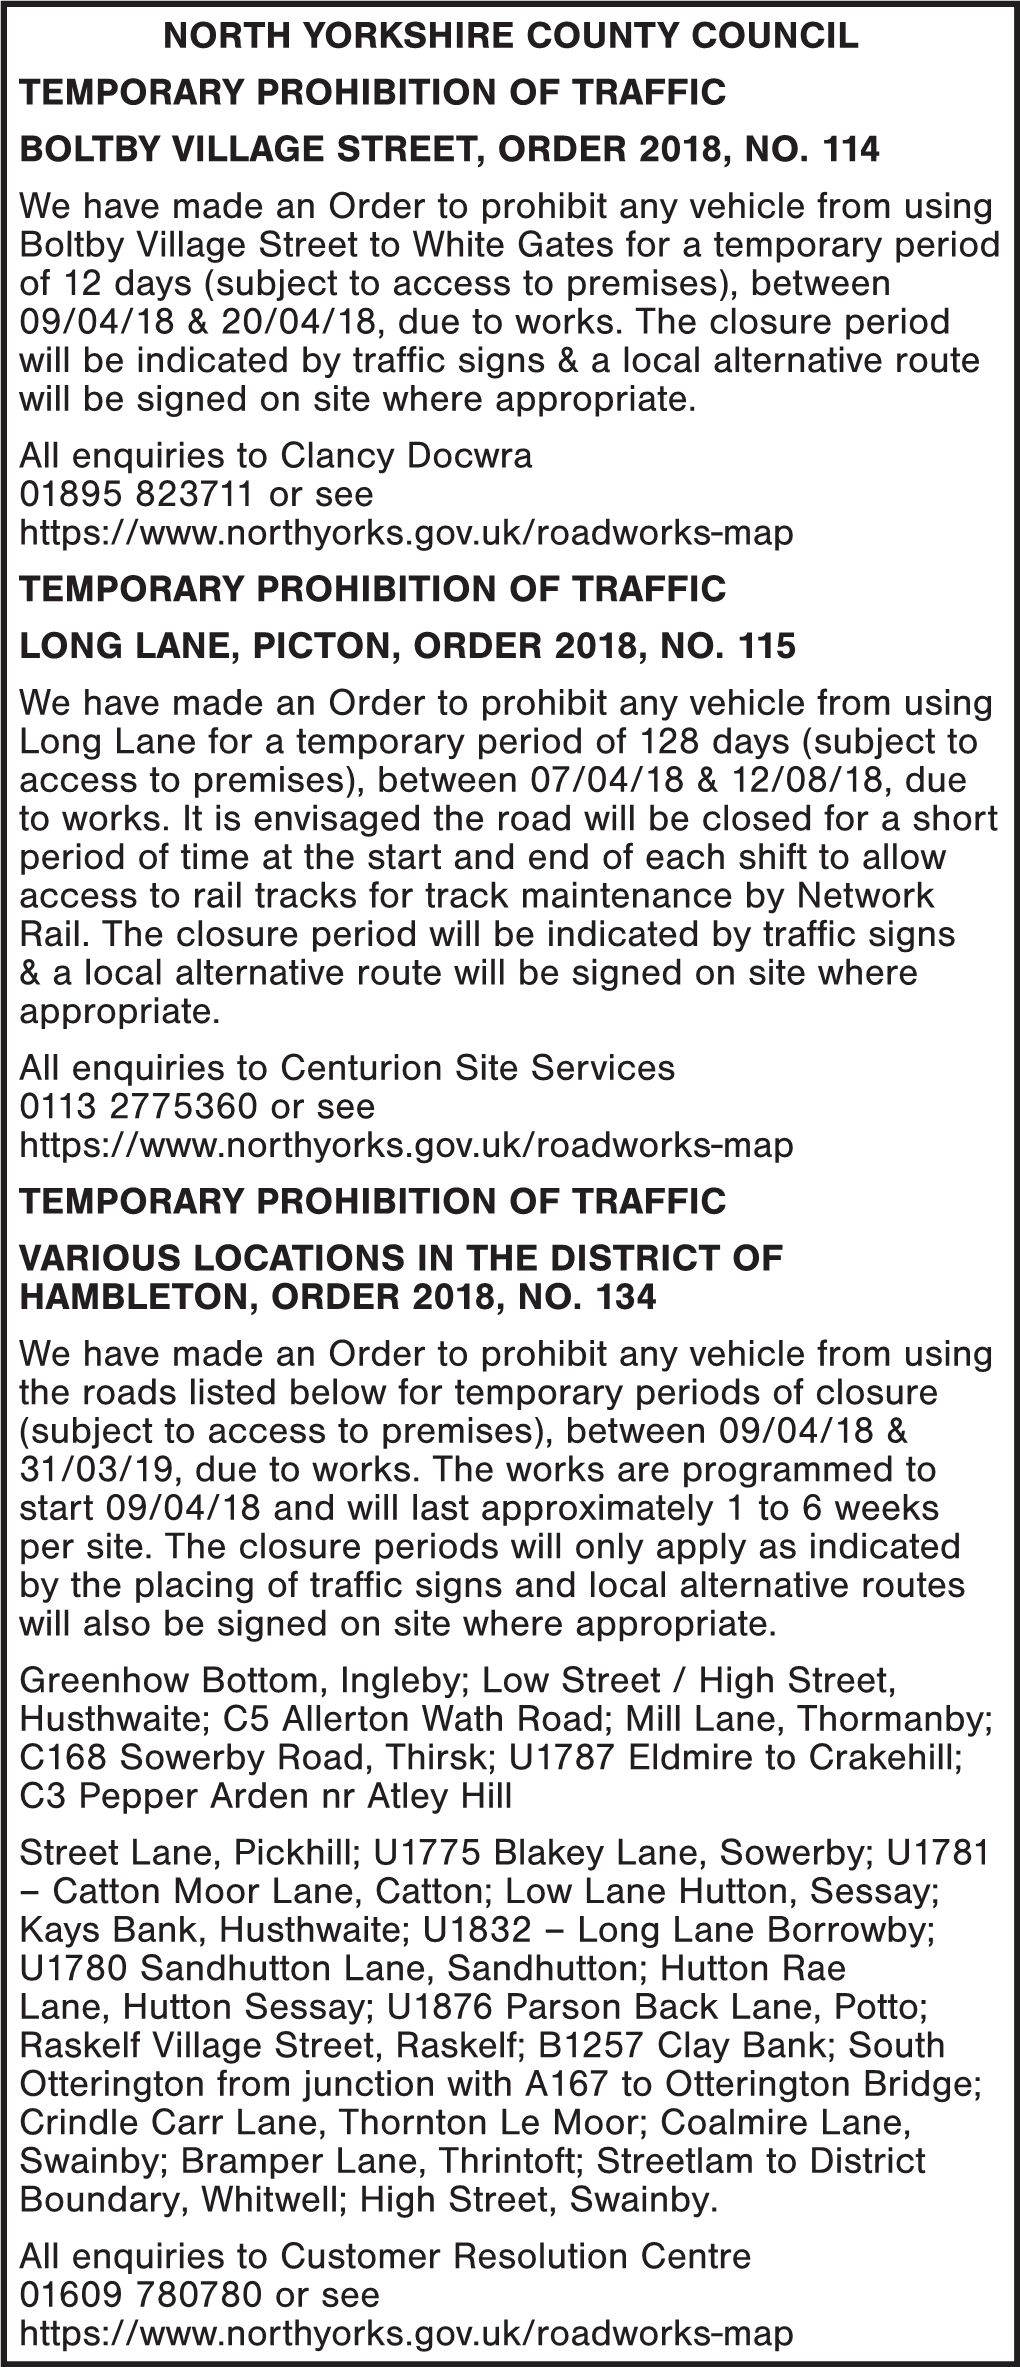 North Yorkshire County Council Temporary Prohibition of Traffic Boltby Village Street, Order 2018, No